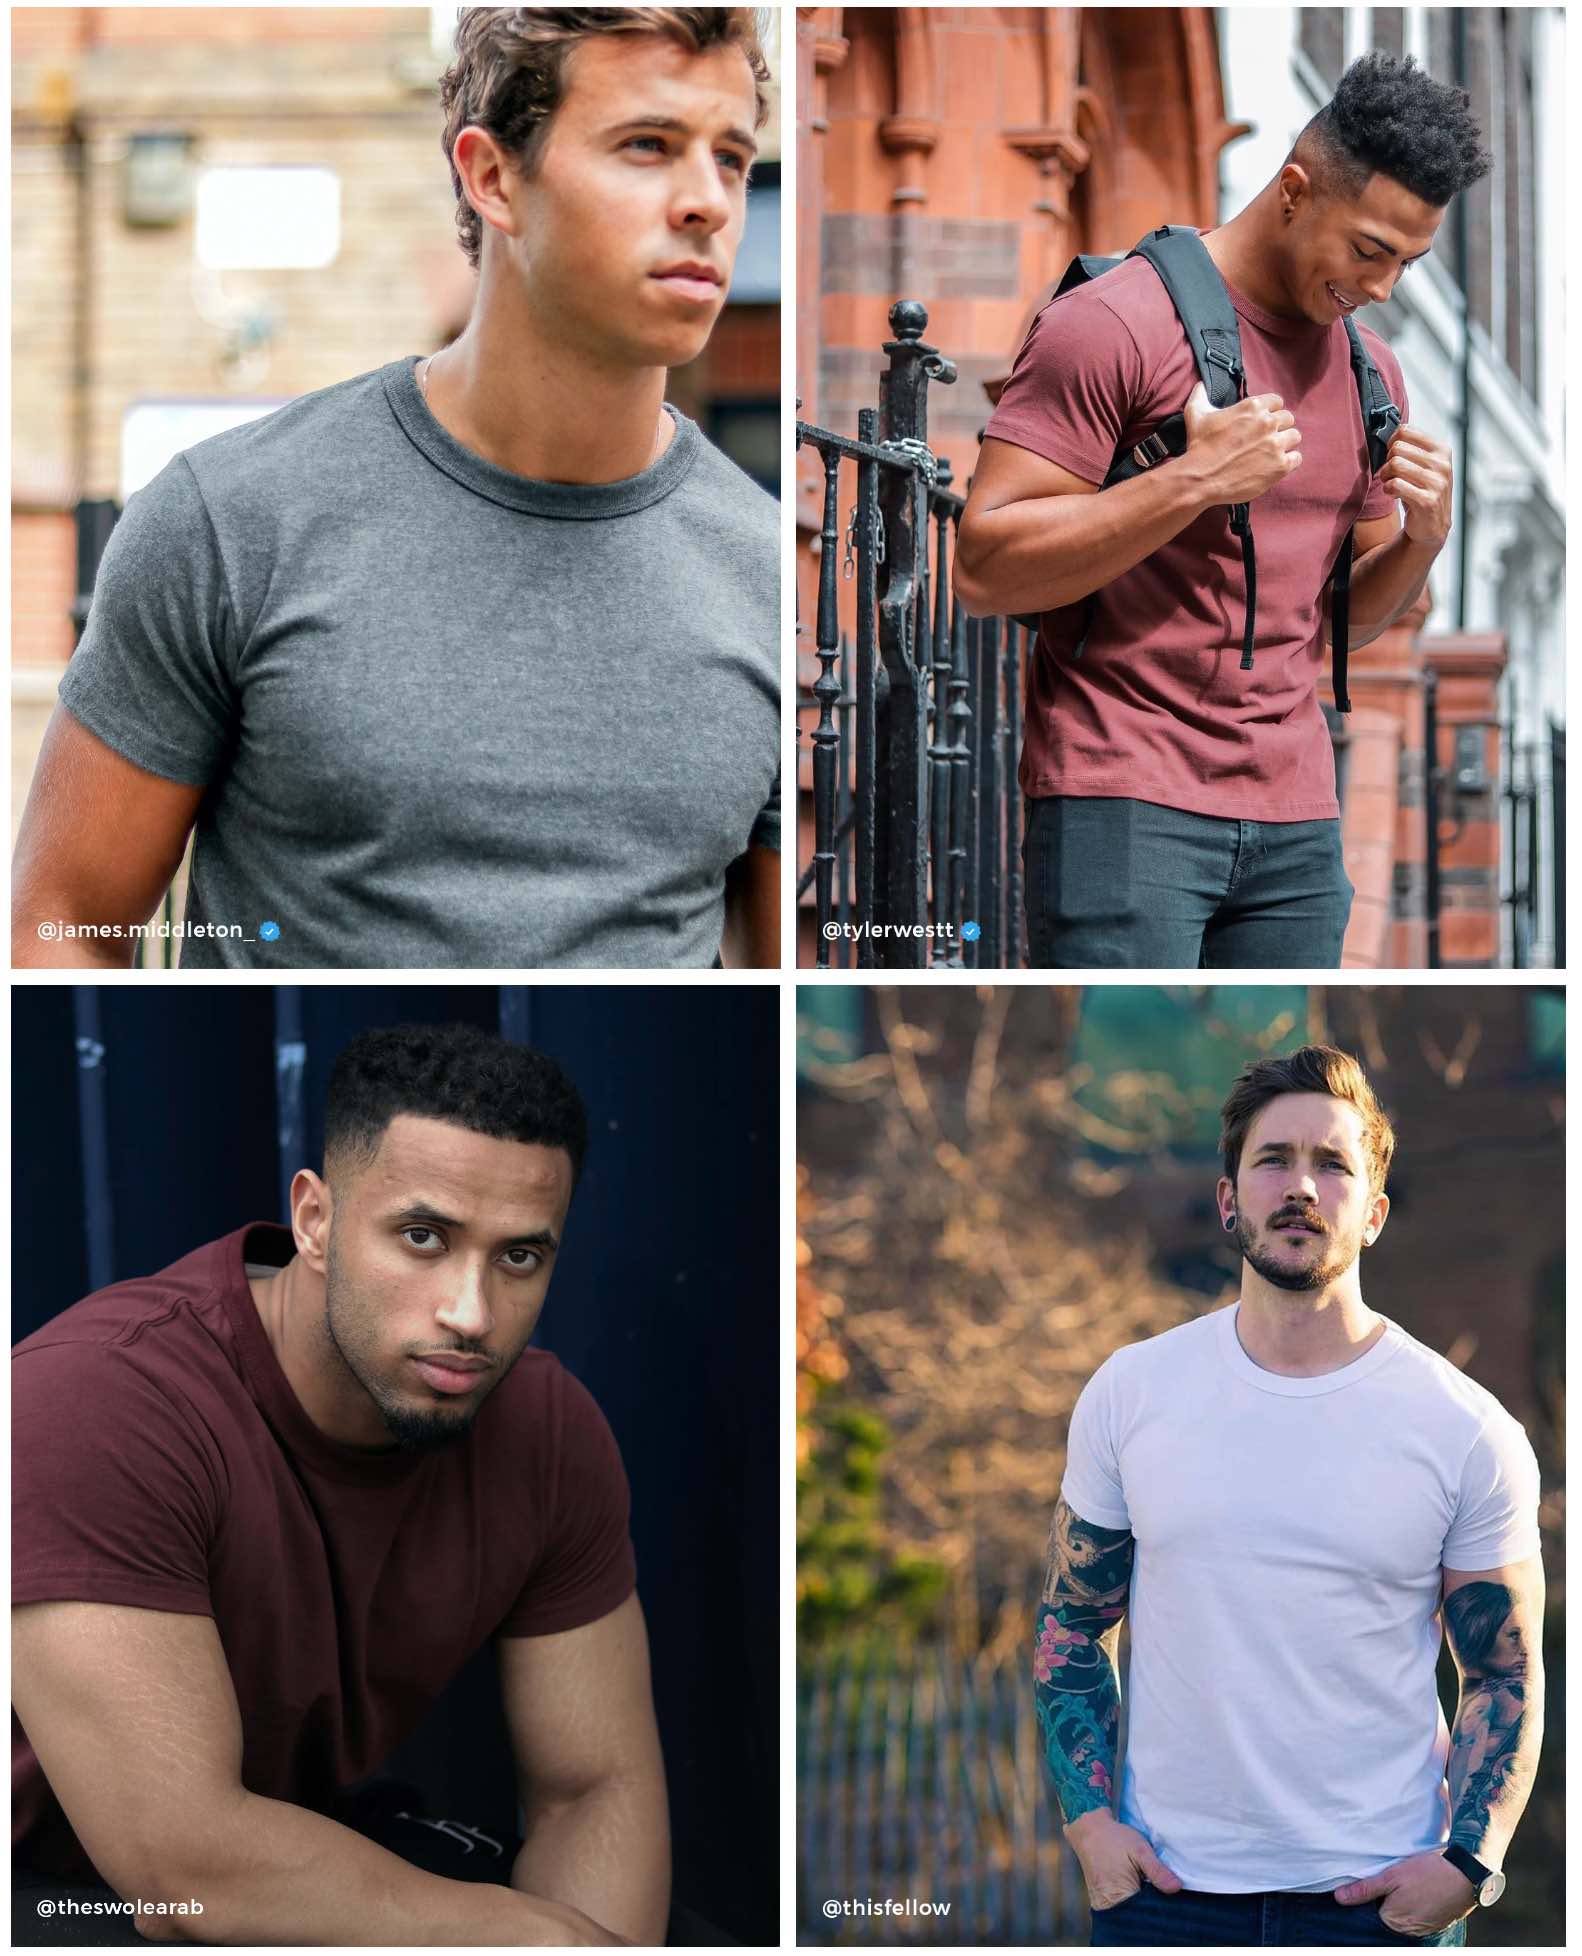 frugthave Burma skade Top 5 Most Expensive Plain T-Shirts for Men | Muscle Fit Basics